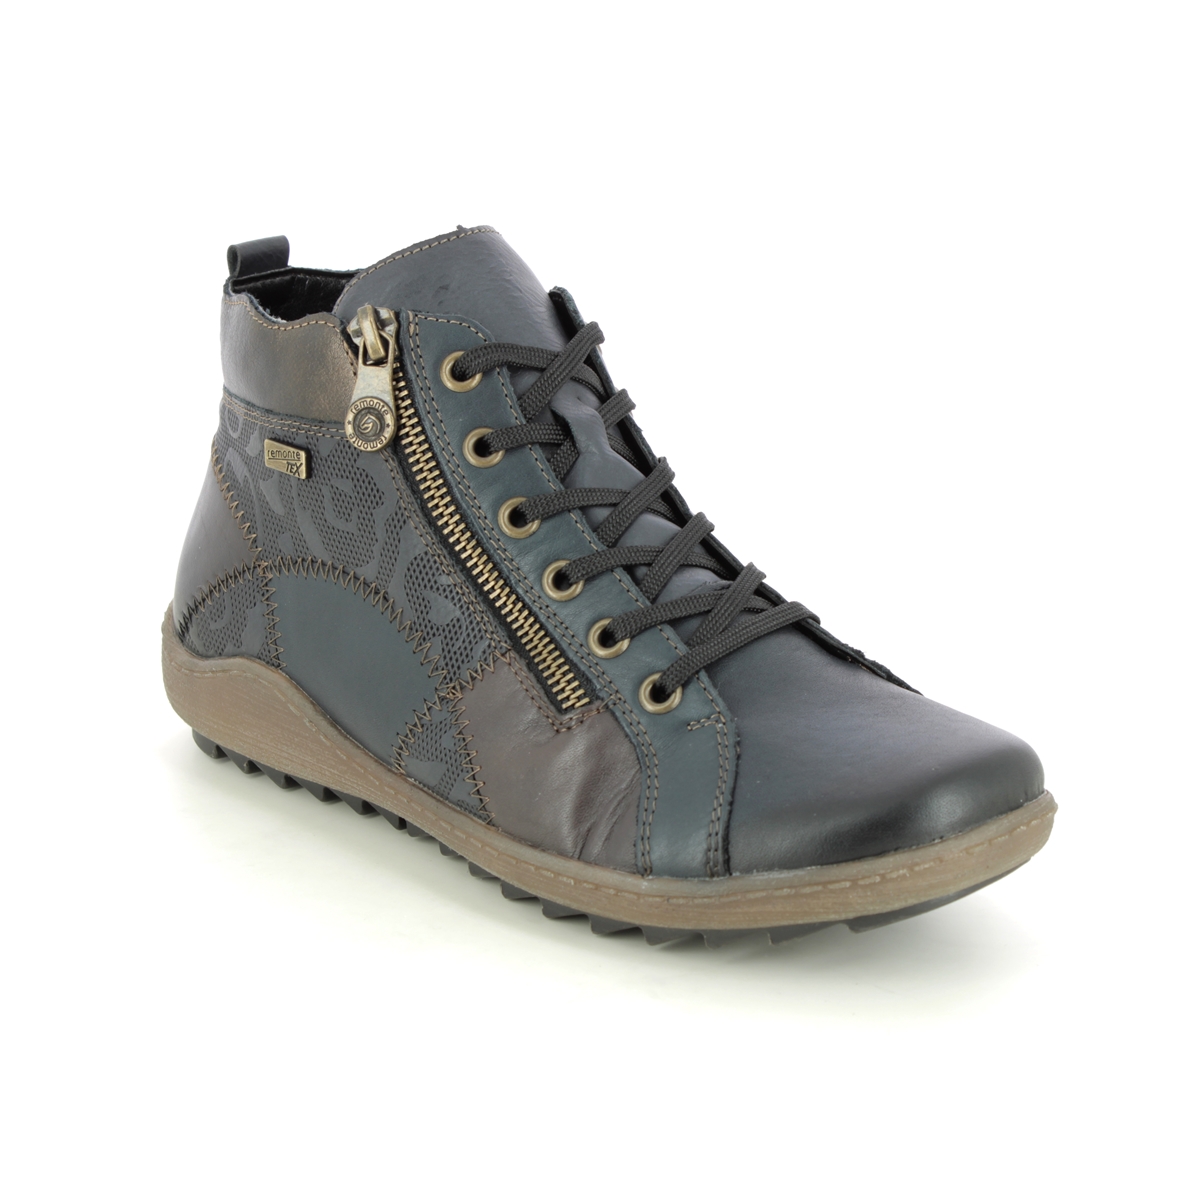 Remonte Zigseipatch Tex Navy Leather Womens Hi Tops R1467-14 In Size 39 In Plain Navy Leather